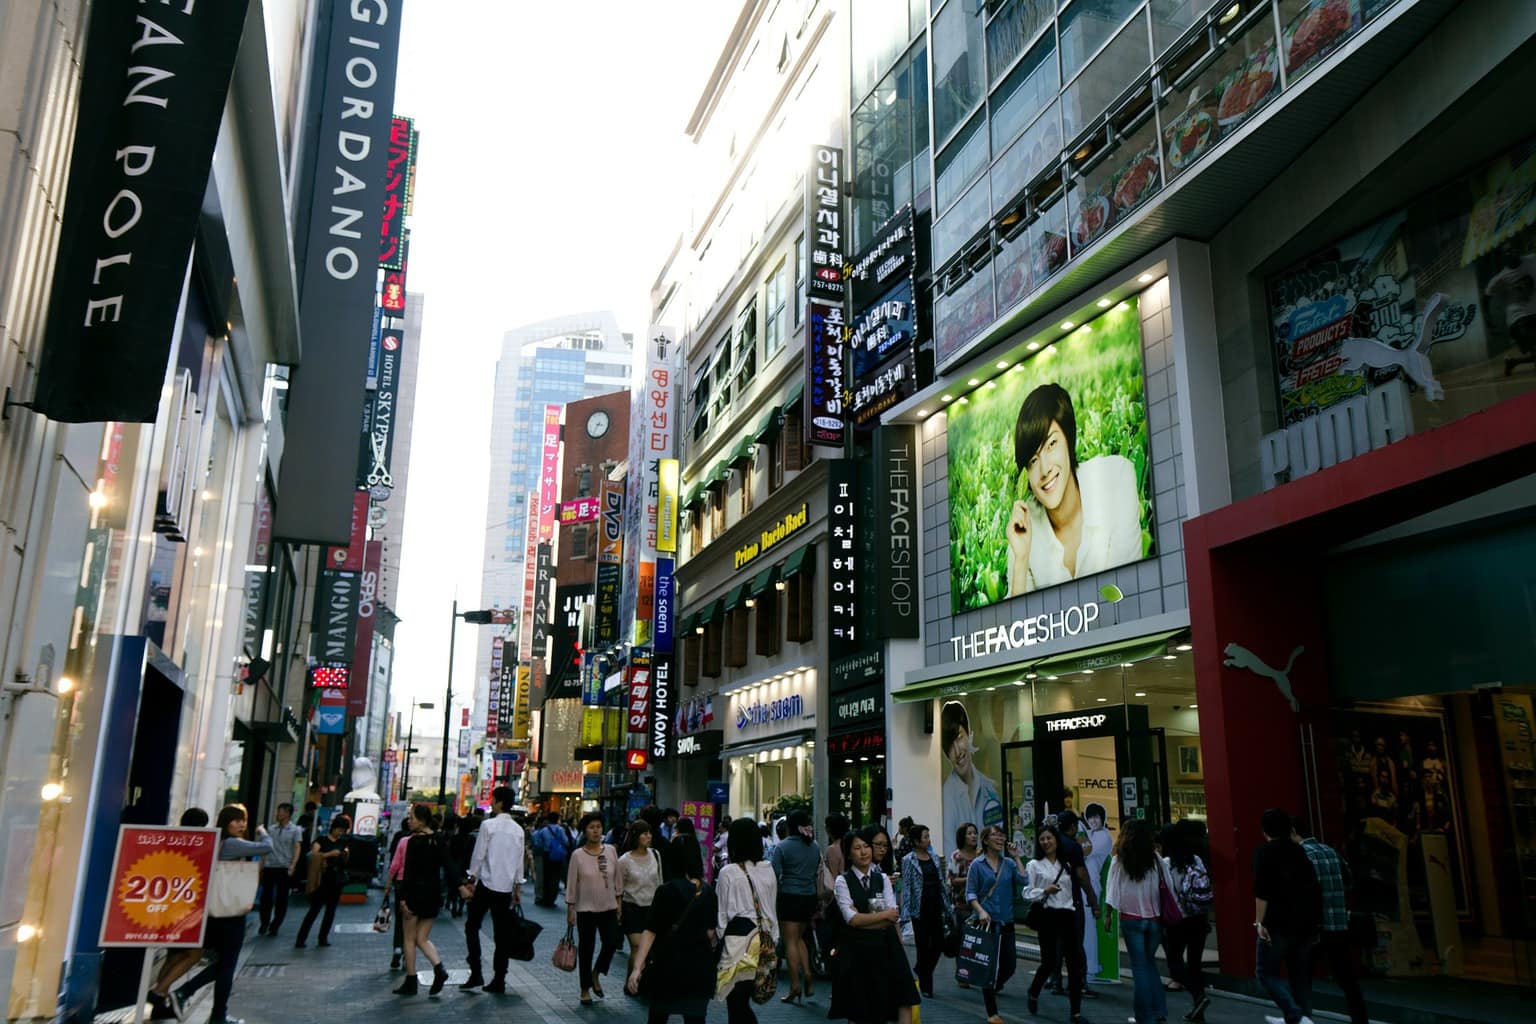 Myeongdong is another shopping mecca